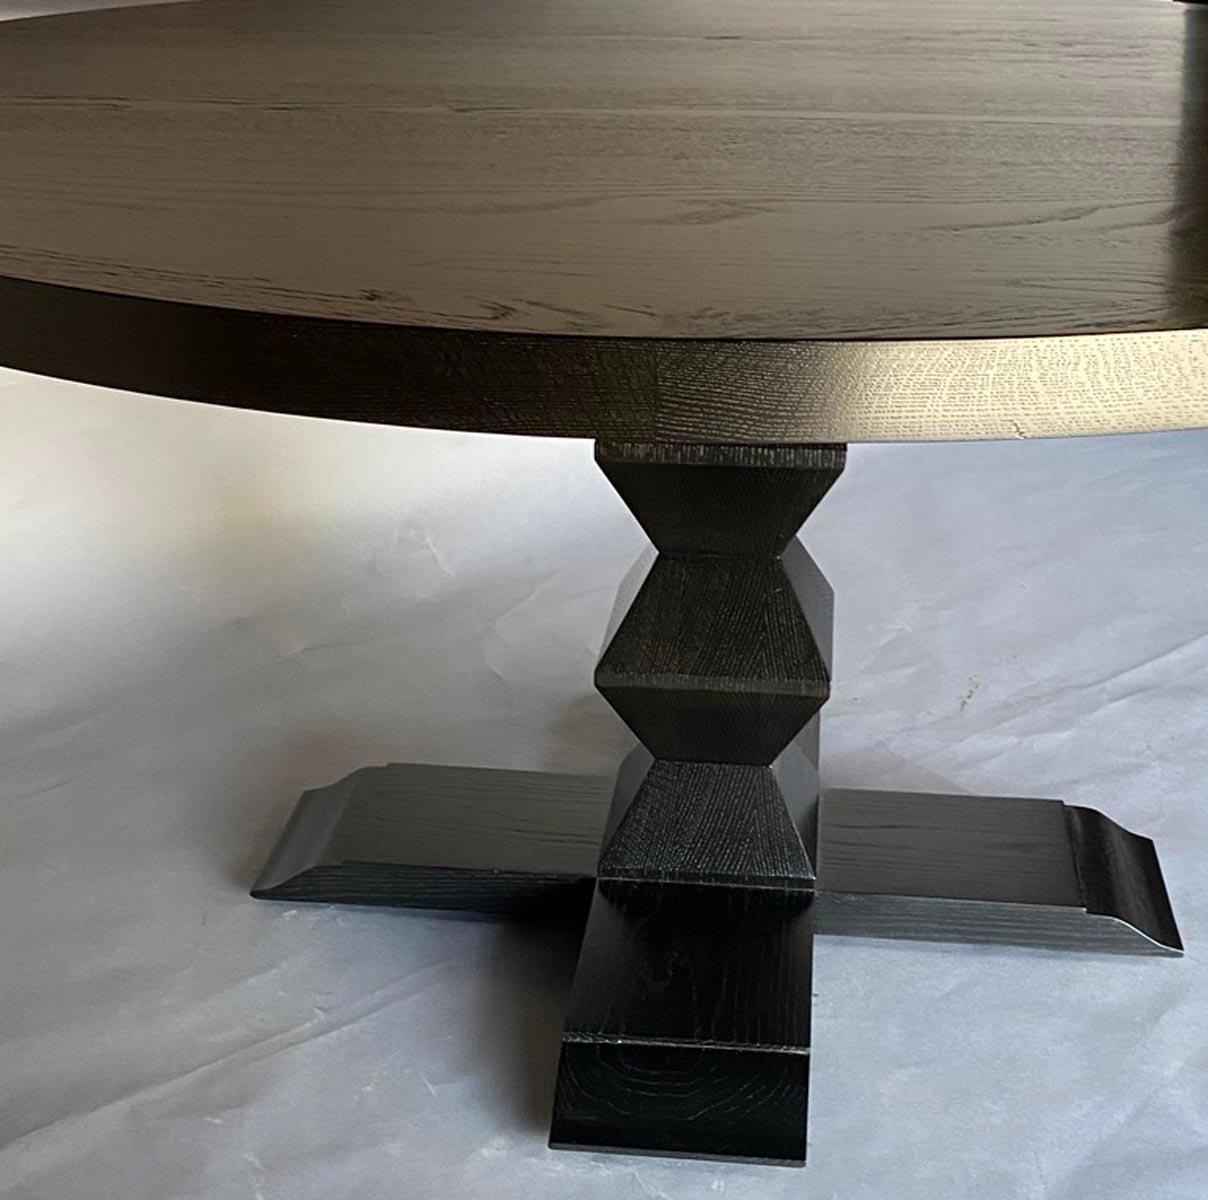 In stock: Our custom Portuguese pedestal table in solid Oak. Two inch framed top. Beautiful ebony finish where the grain is still visible. This table is available off the floor but can also be custom made in other sizes and finishes. 
Made in Los